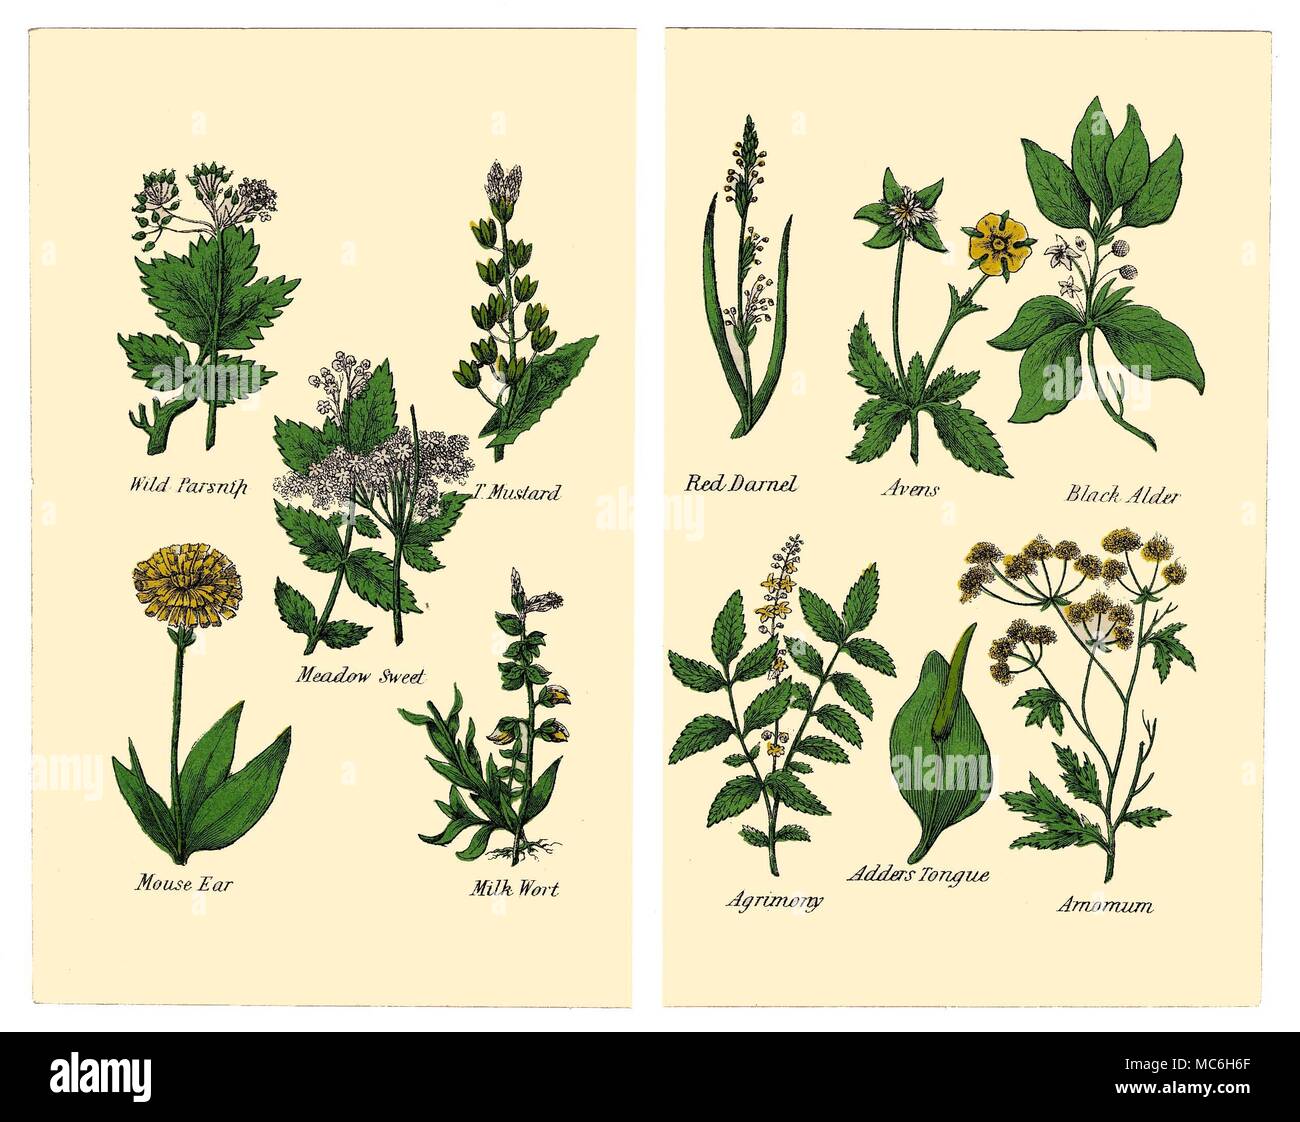 HERBS AND FLOWERS The following plants are from two plates in the 1869 Halifax edition of Matthew Robinson's The New Family Herbal. Wild Parsnip, Mustard, Meadow Sweet, Mouse Ear, Milk Wort. Red Darnel, Avens, Black Alder, Agrimony, Adders Tongue, Arnomum. Stock Photo